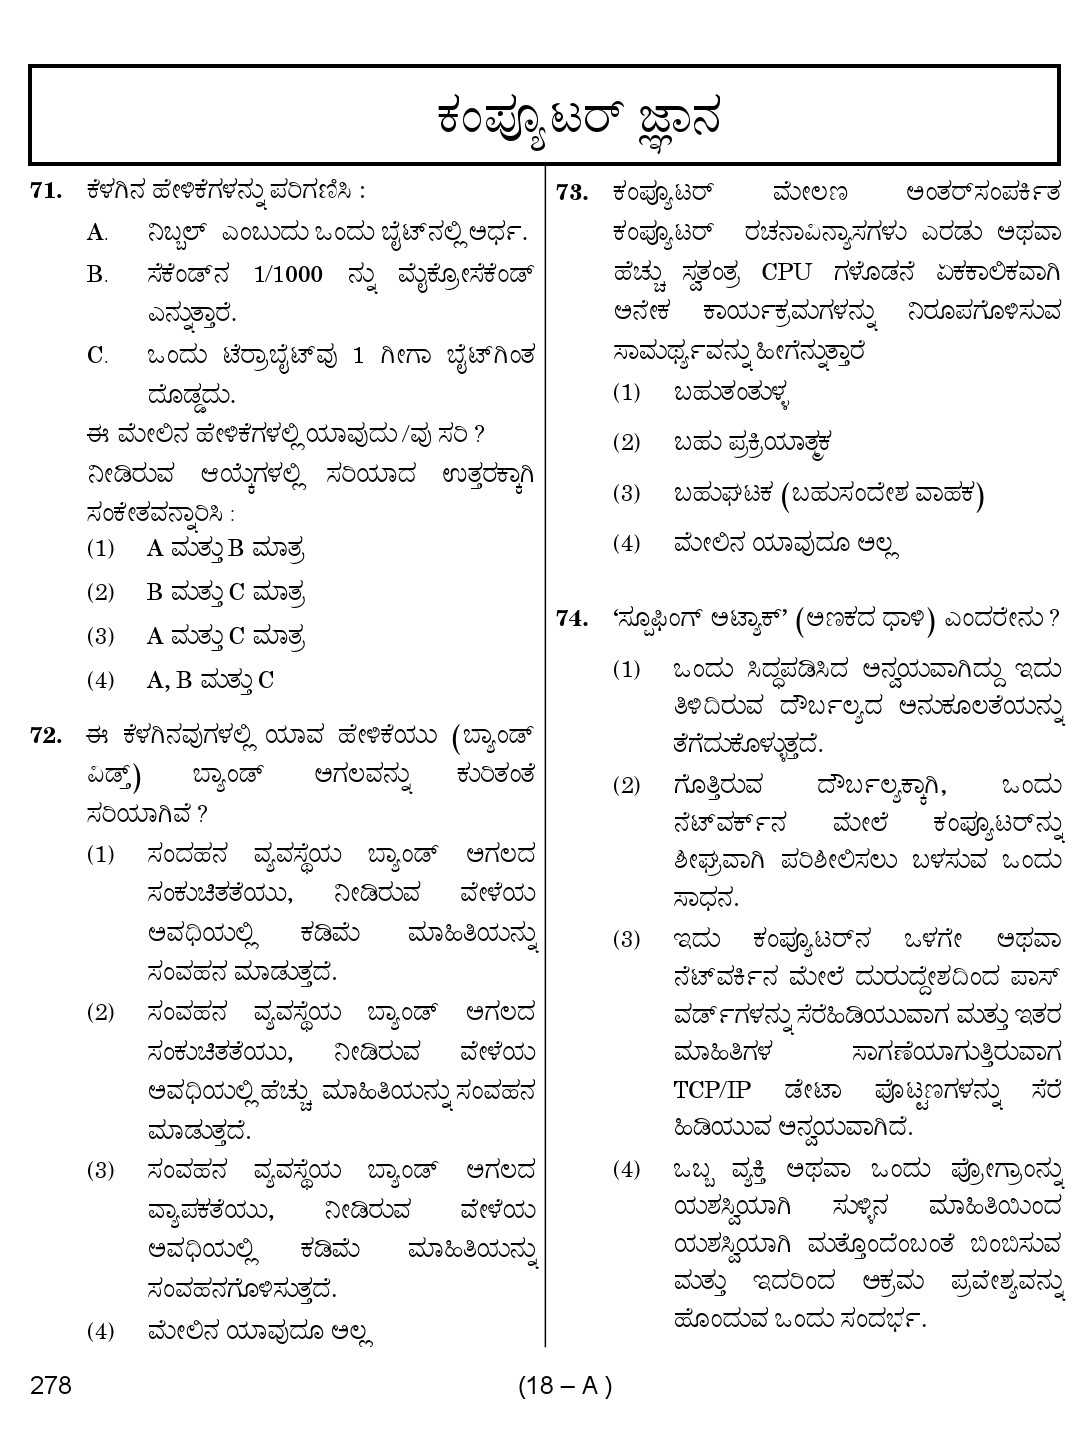 Karnataka PSC First Division Computer Assistants Exam Sample Question Paper 278 18